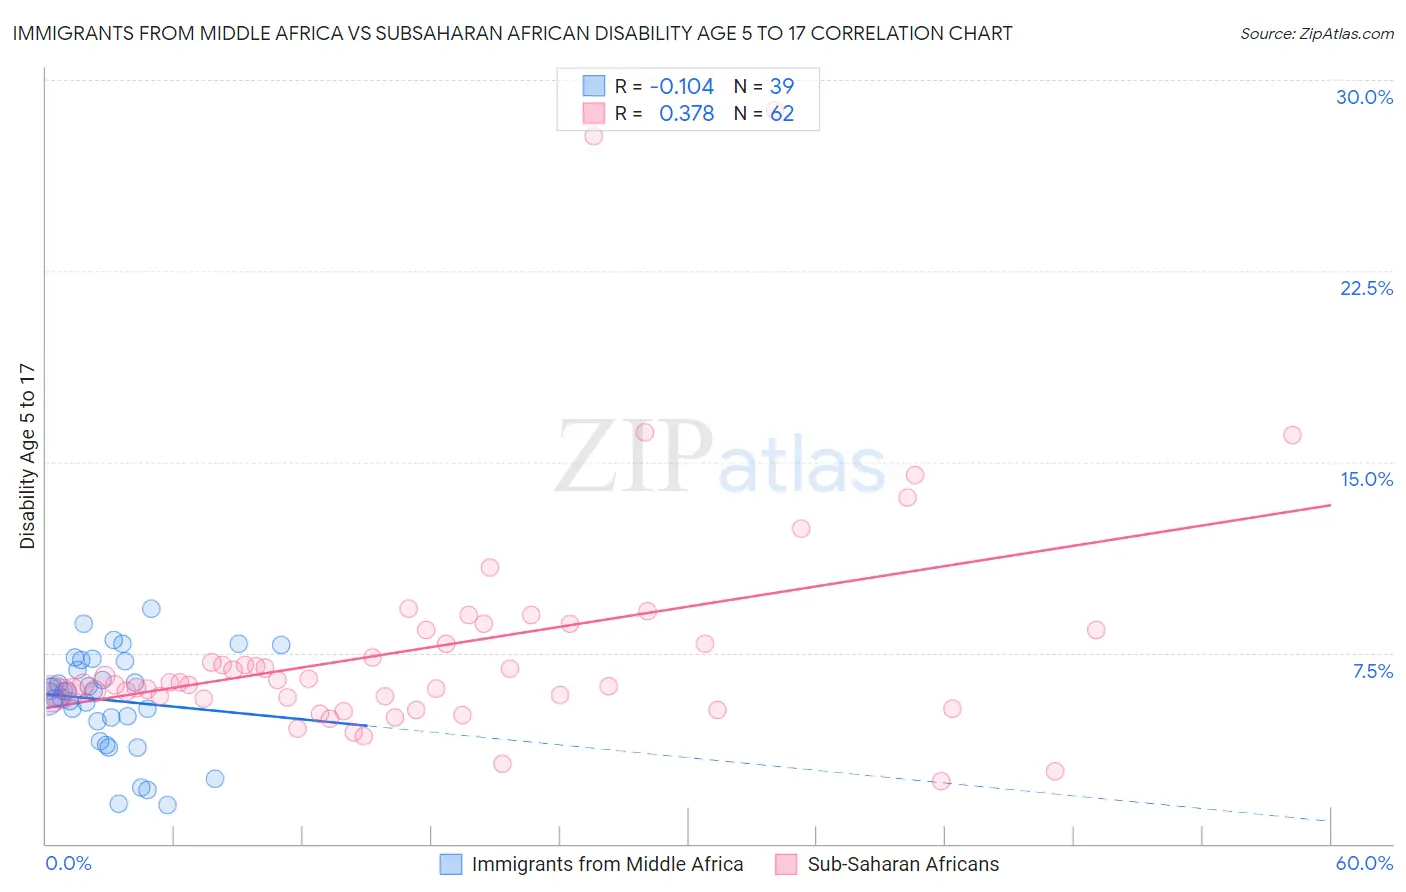 Immigrants from Middle Africa vs Subsaharan African Disability Age 5 to 17